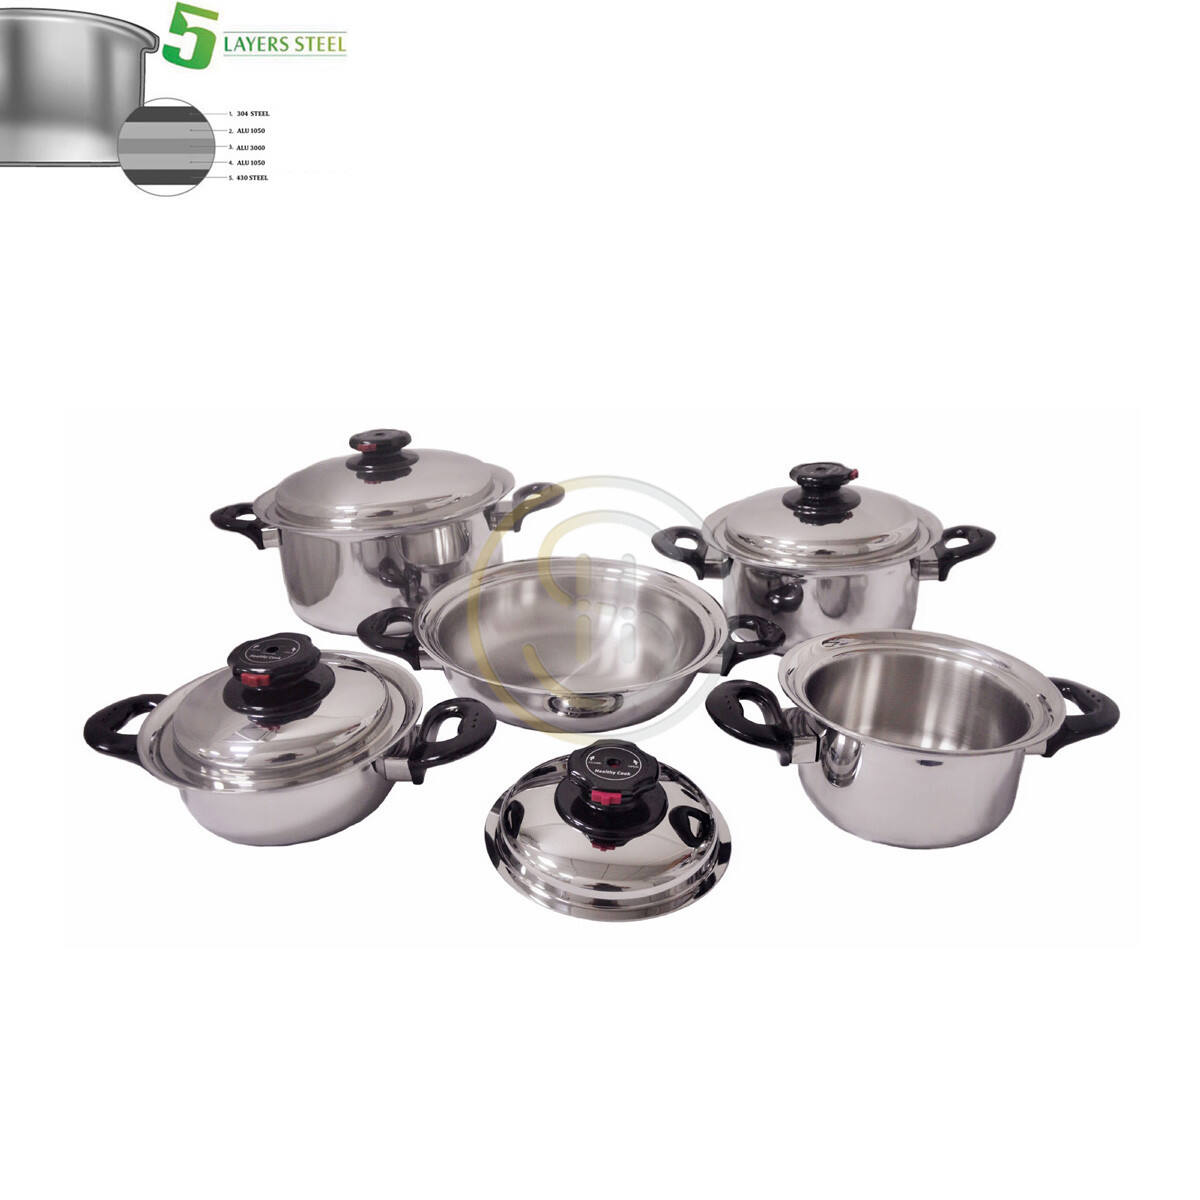 Surgical steel cookware